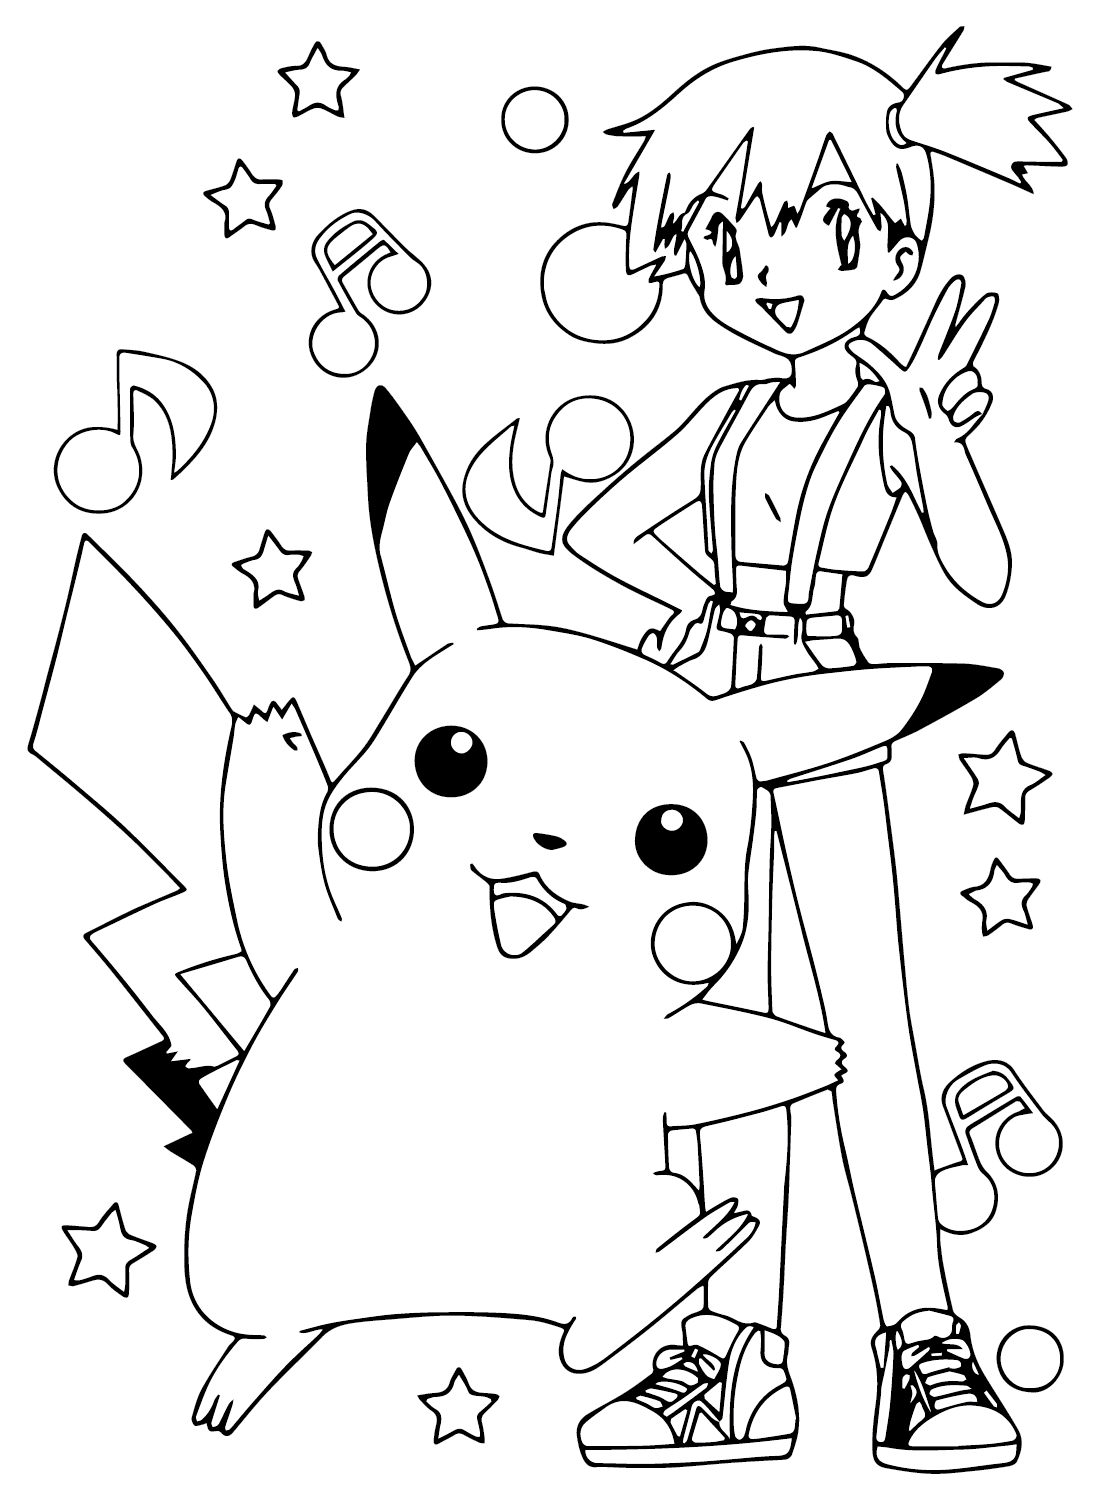 Misty with Pikachu Coloring Page